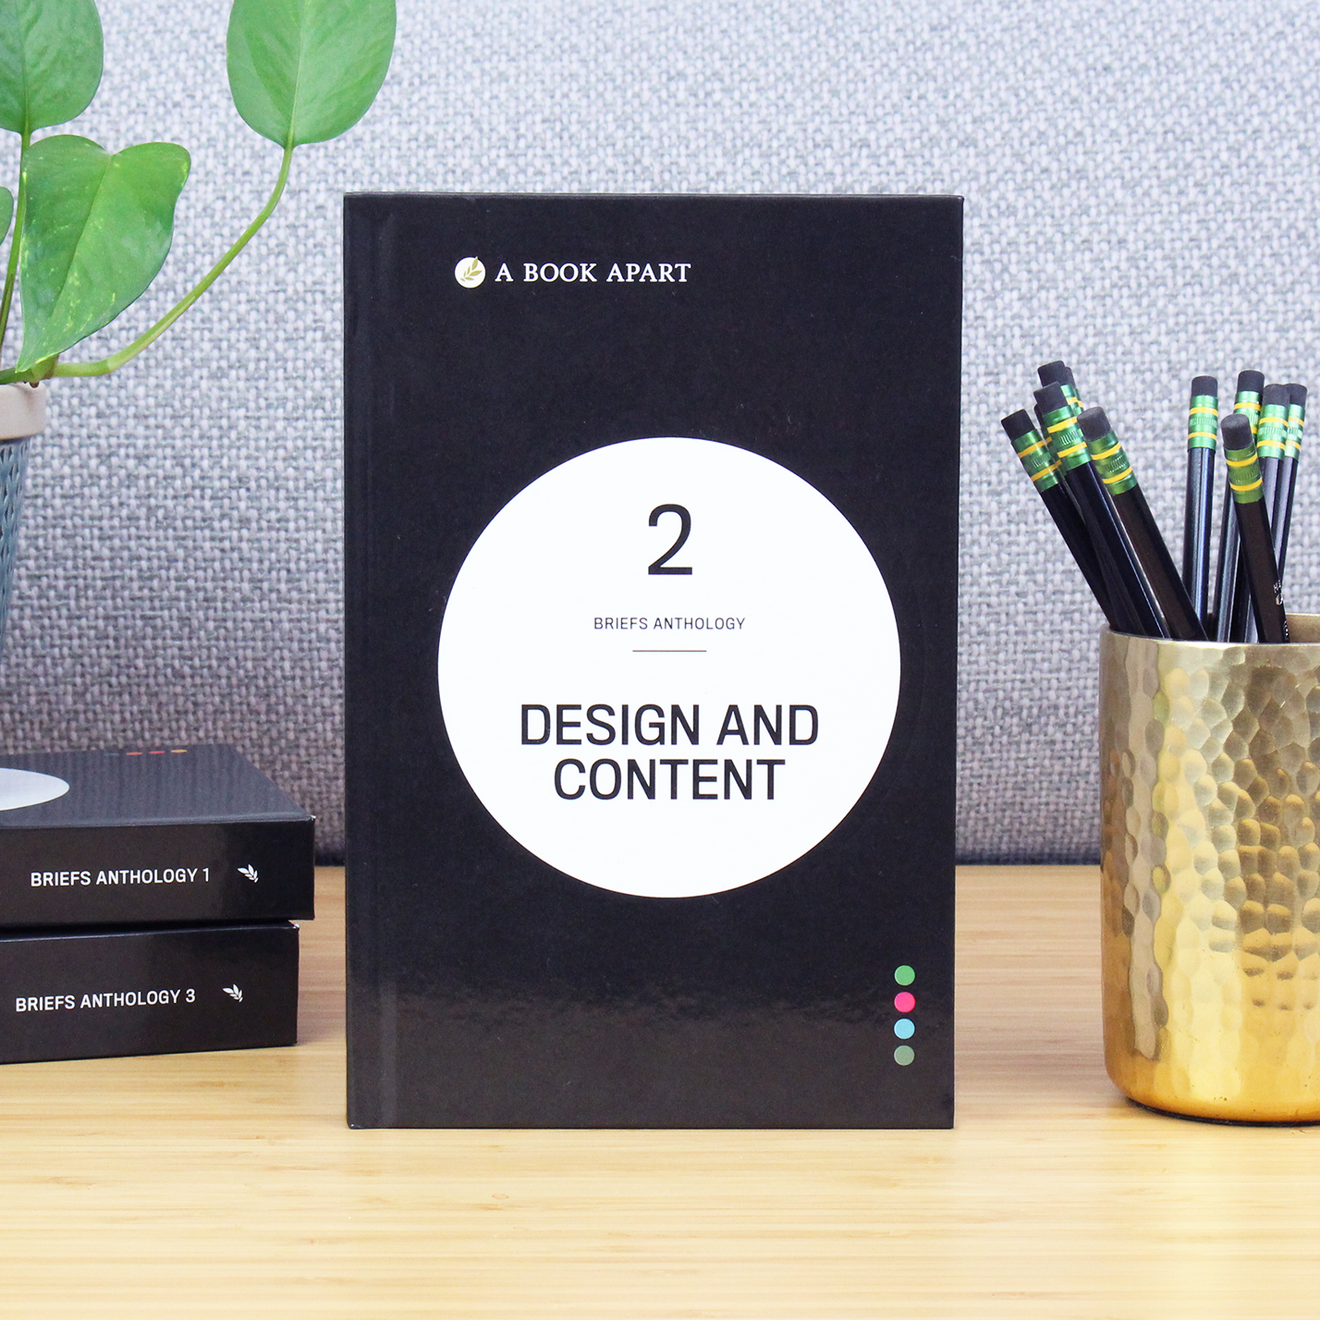 Briefs Anthology 2: Design and Content